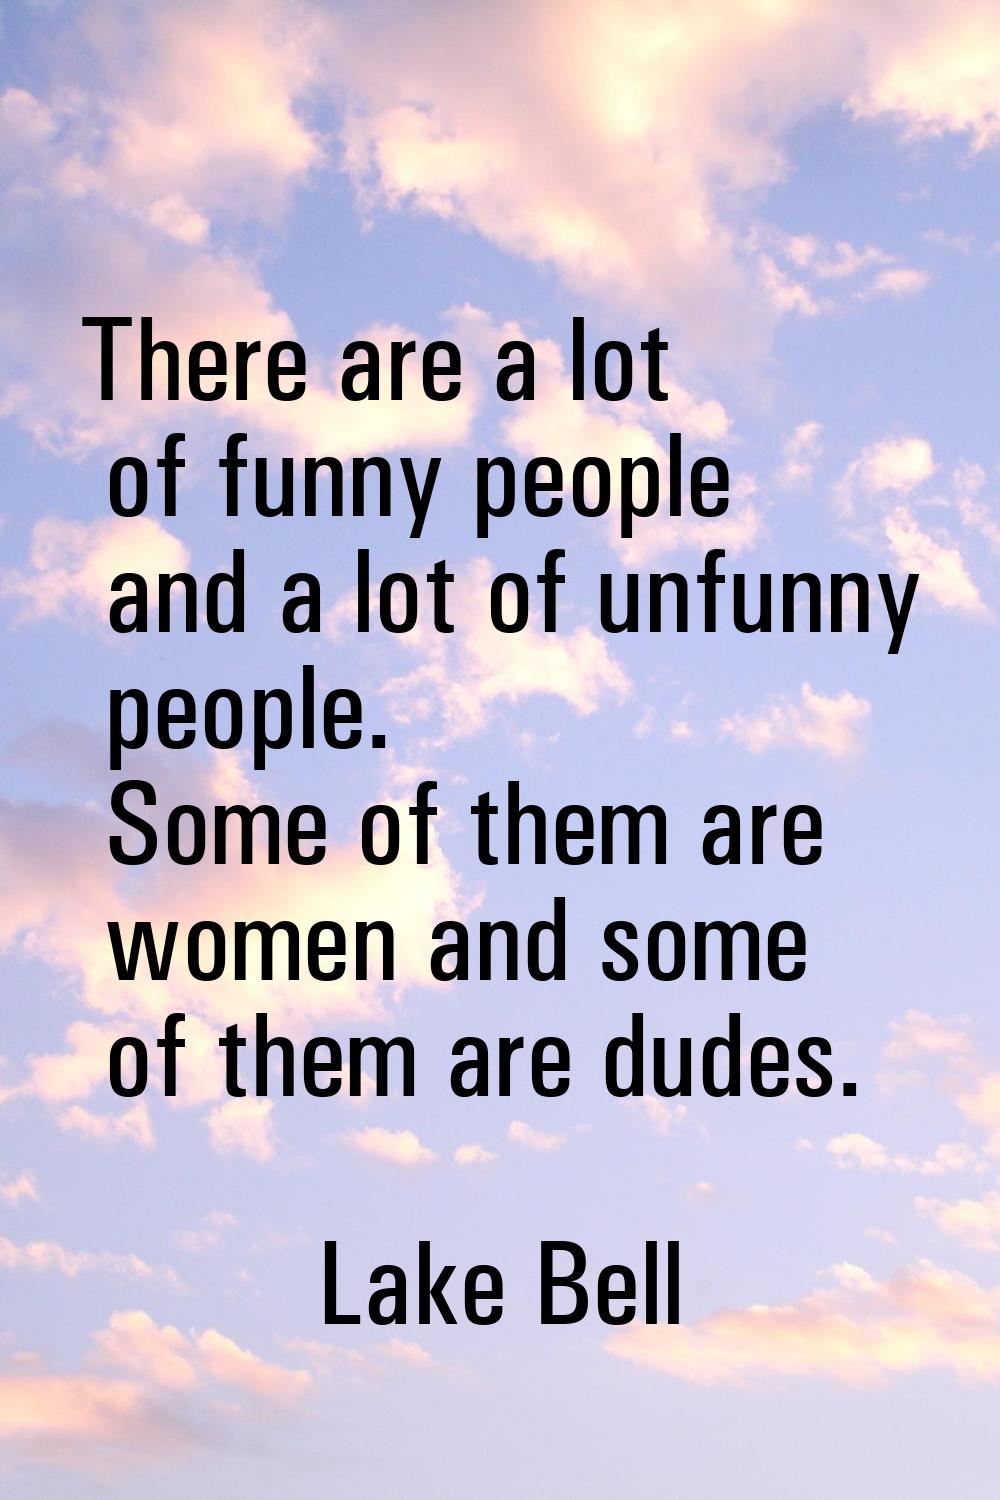 There are a lot of funny people and a lot of unfunny people. Some of them are women and some of the